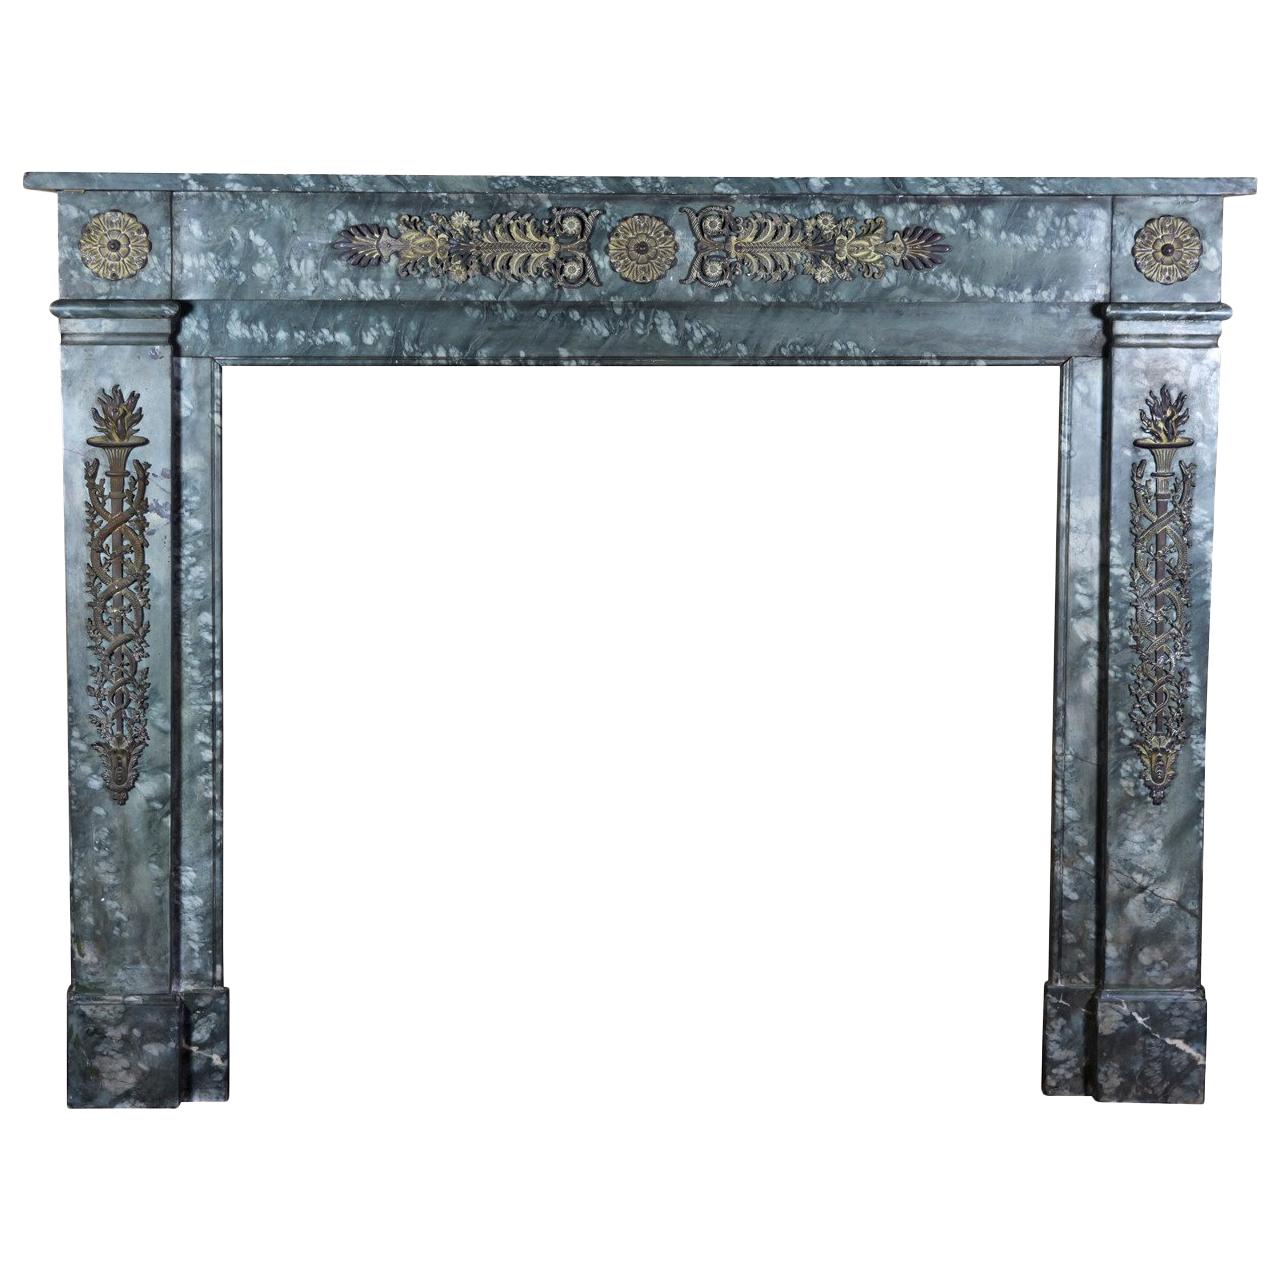 18th Century Fine Marble Fireplace Surround With Bespoke Brass Bijouterie For Sale